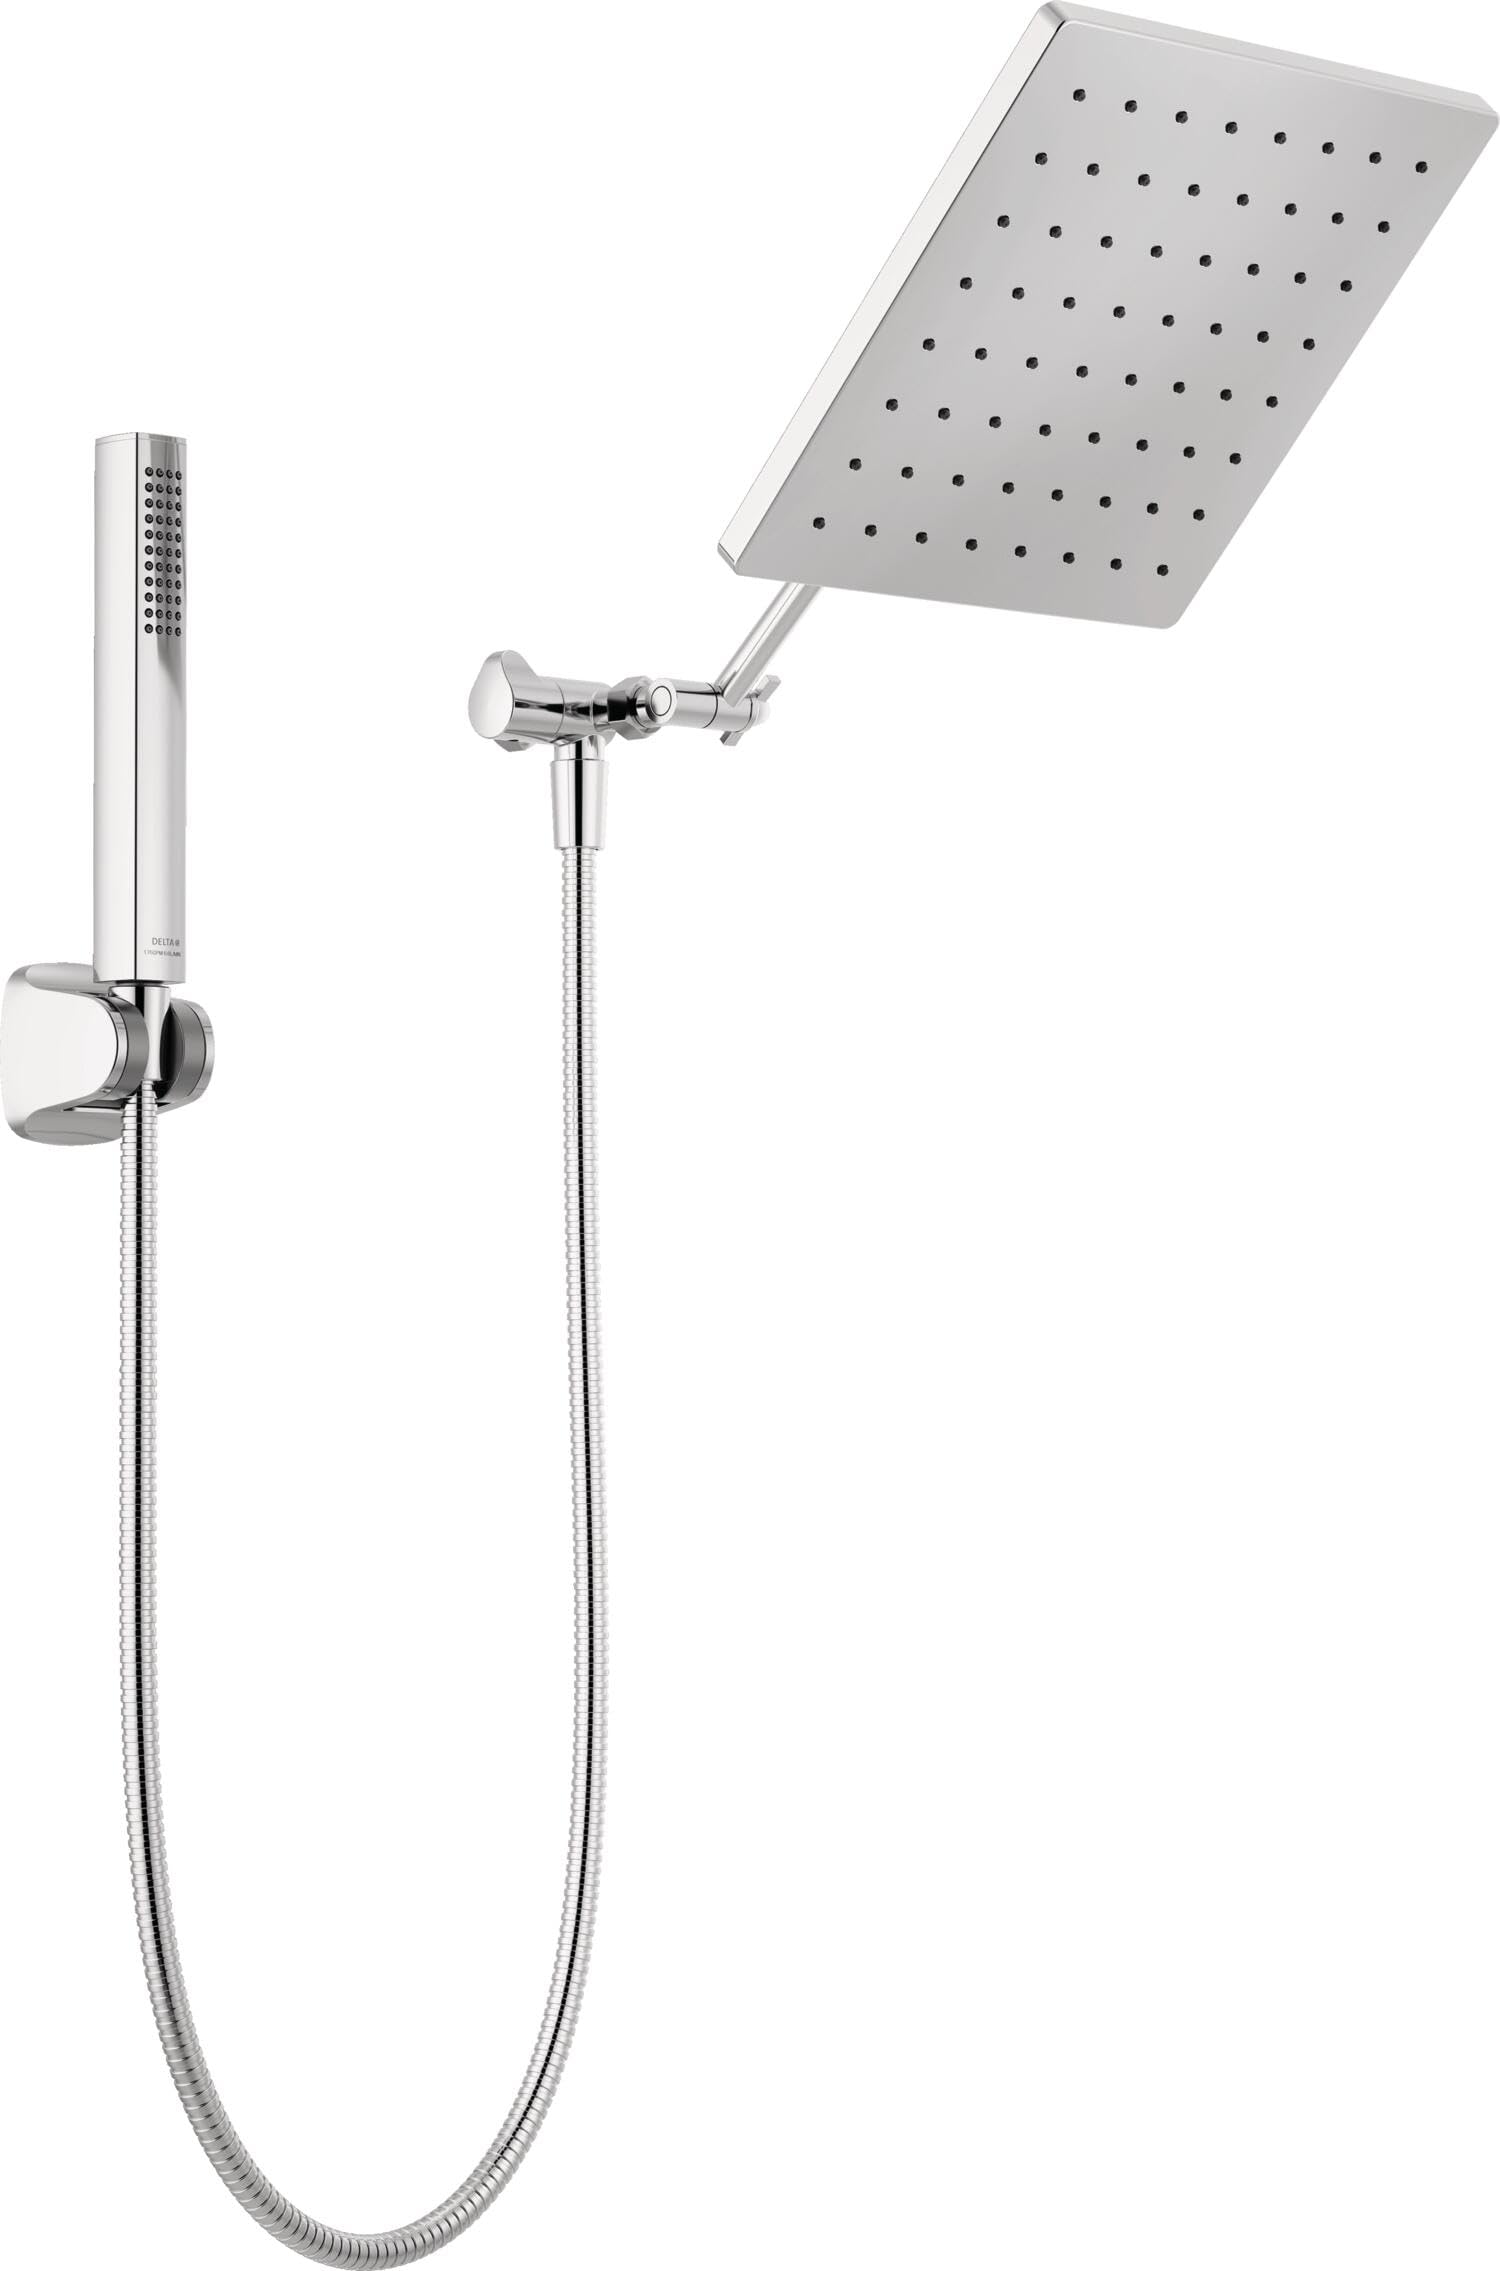 DELTA FAUCET 10-inch Raincan Shower Head and Hand Held Shower Combo, Chrome Square Shower Head, Rainfall Shower Head, Hand Shower, High Pressure Shower Head, 1.75 GPM Flow Rate, Chrome 75527